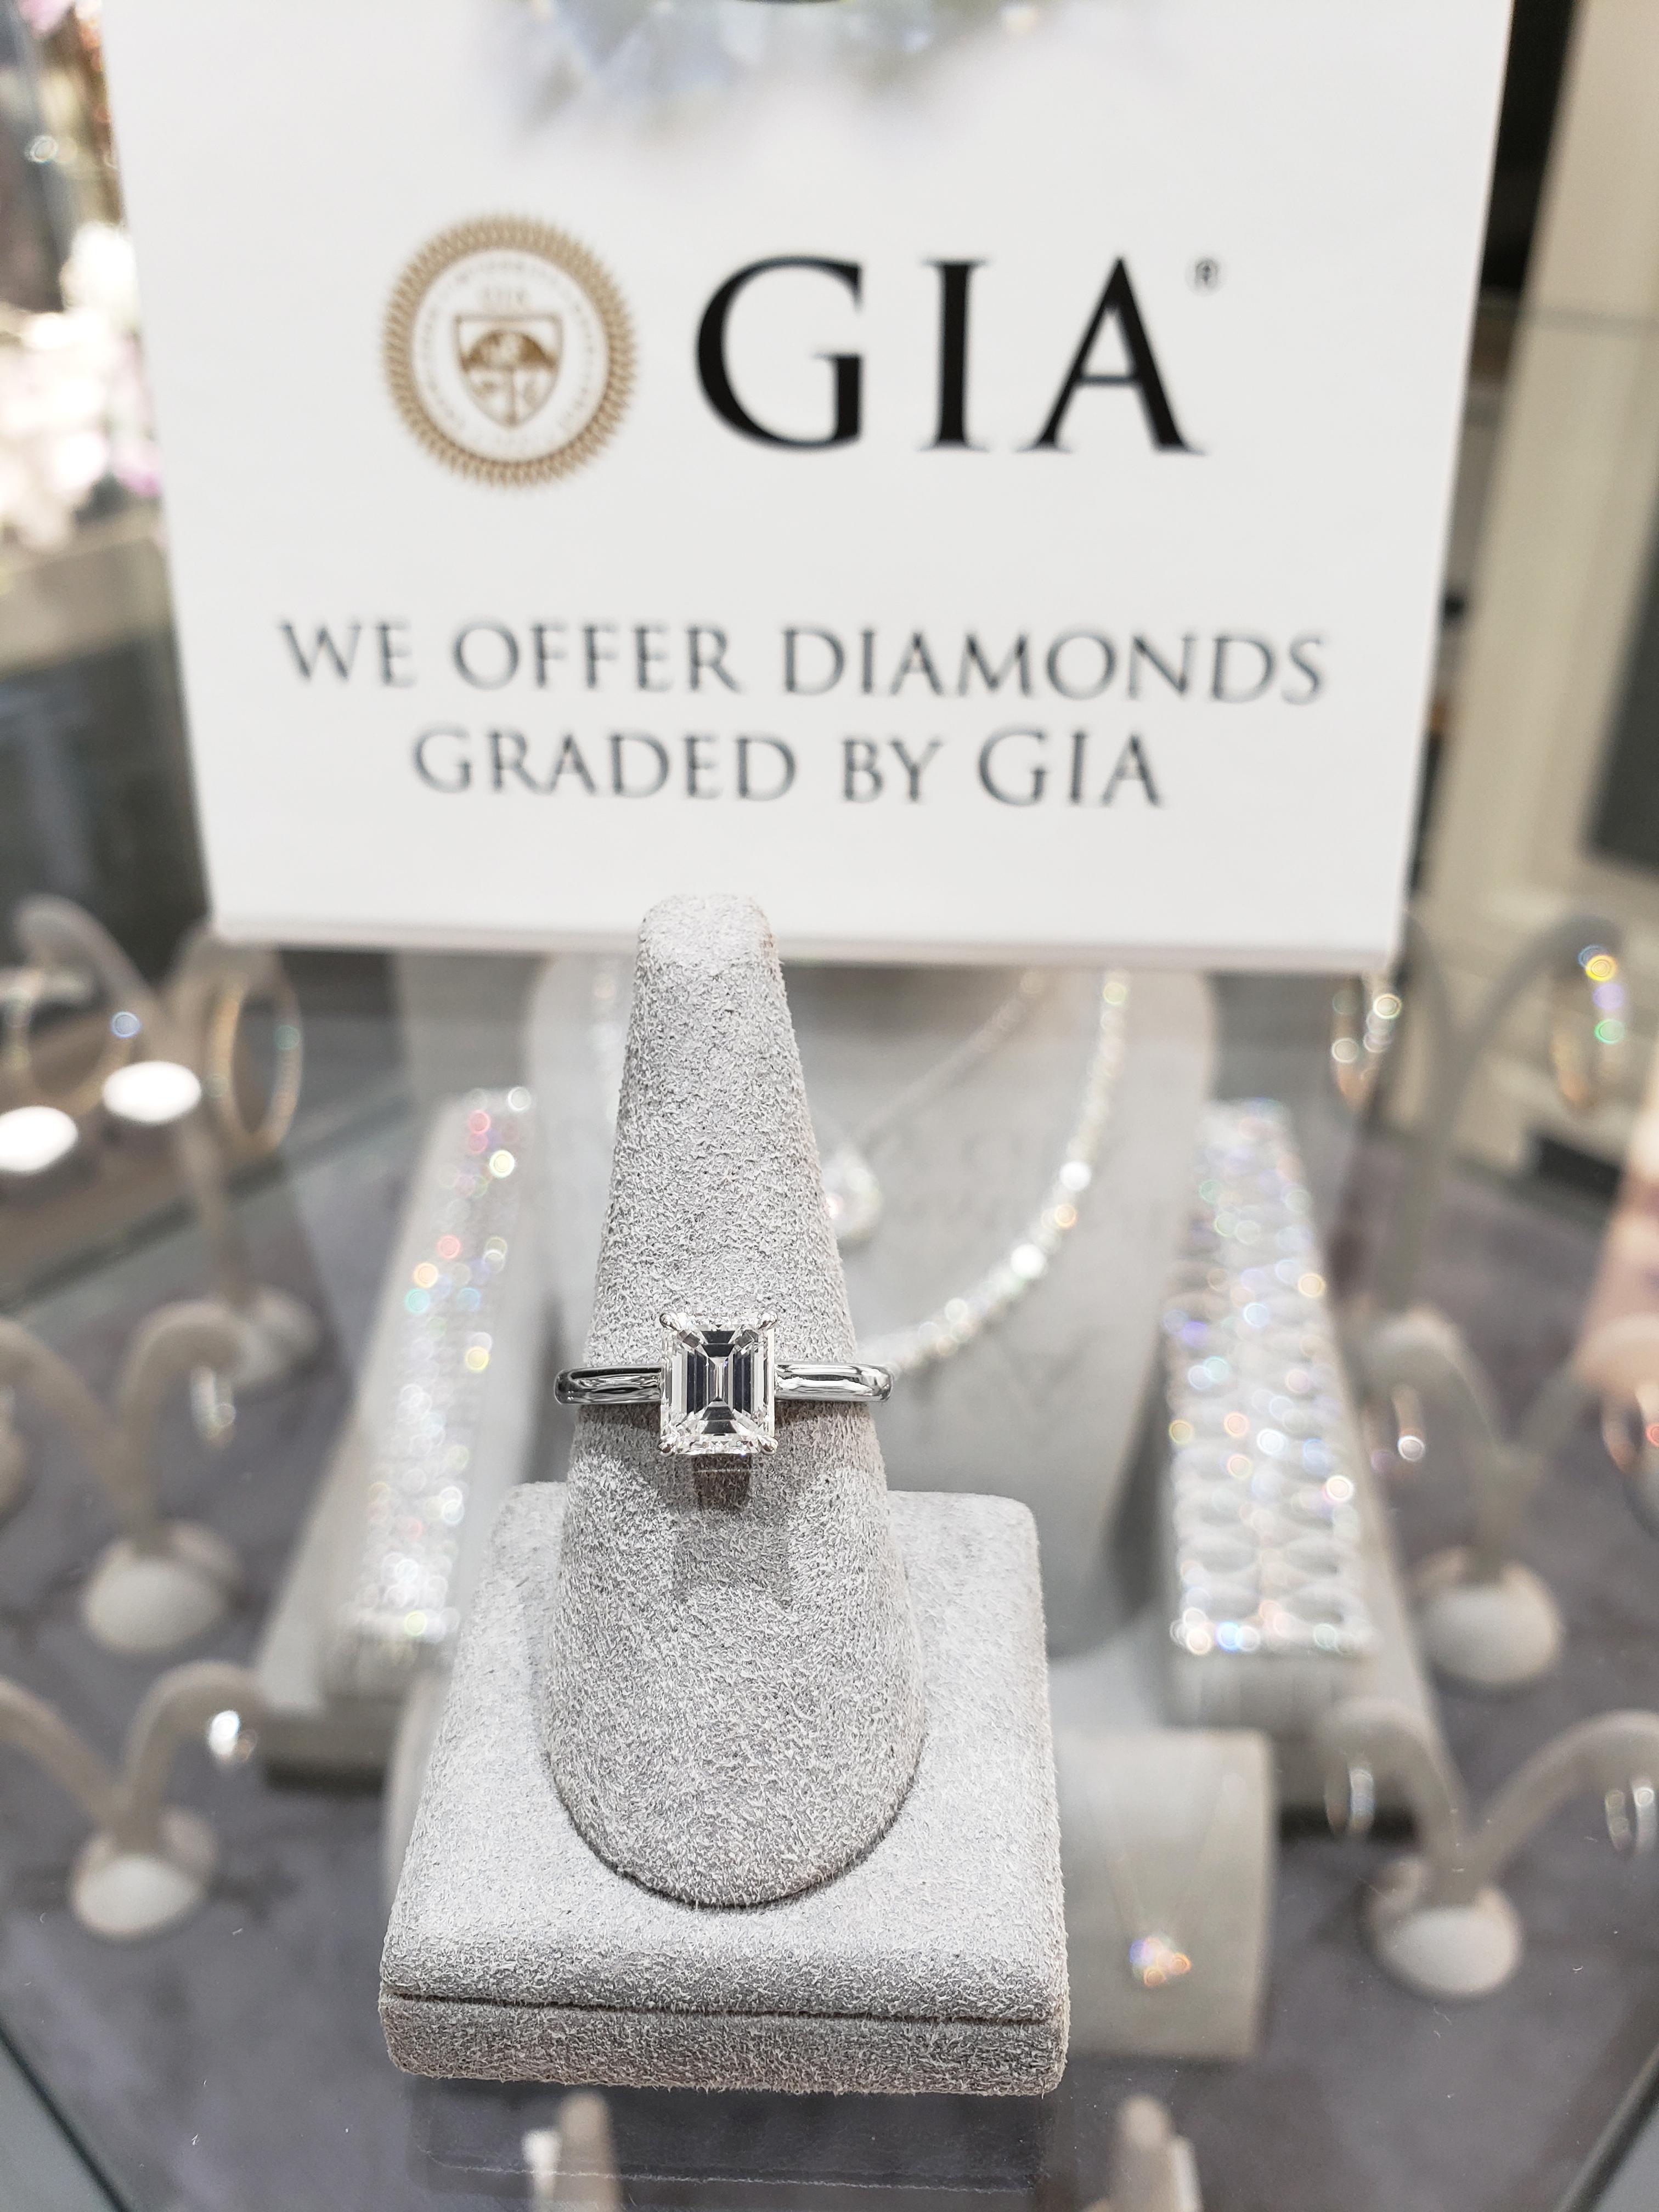 A classic engagement ring style showcasing a single emerald cut diamond center stone set in a rounded platinum composition. GIA certified the diamond as H color, VVS2 clarity, and weighs 1.54 carats. A timeless piece that accentuates the beauty of